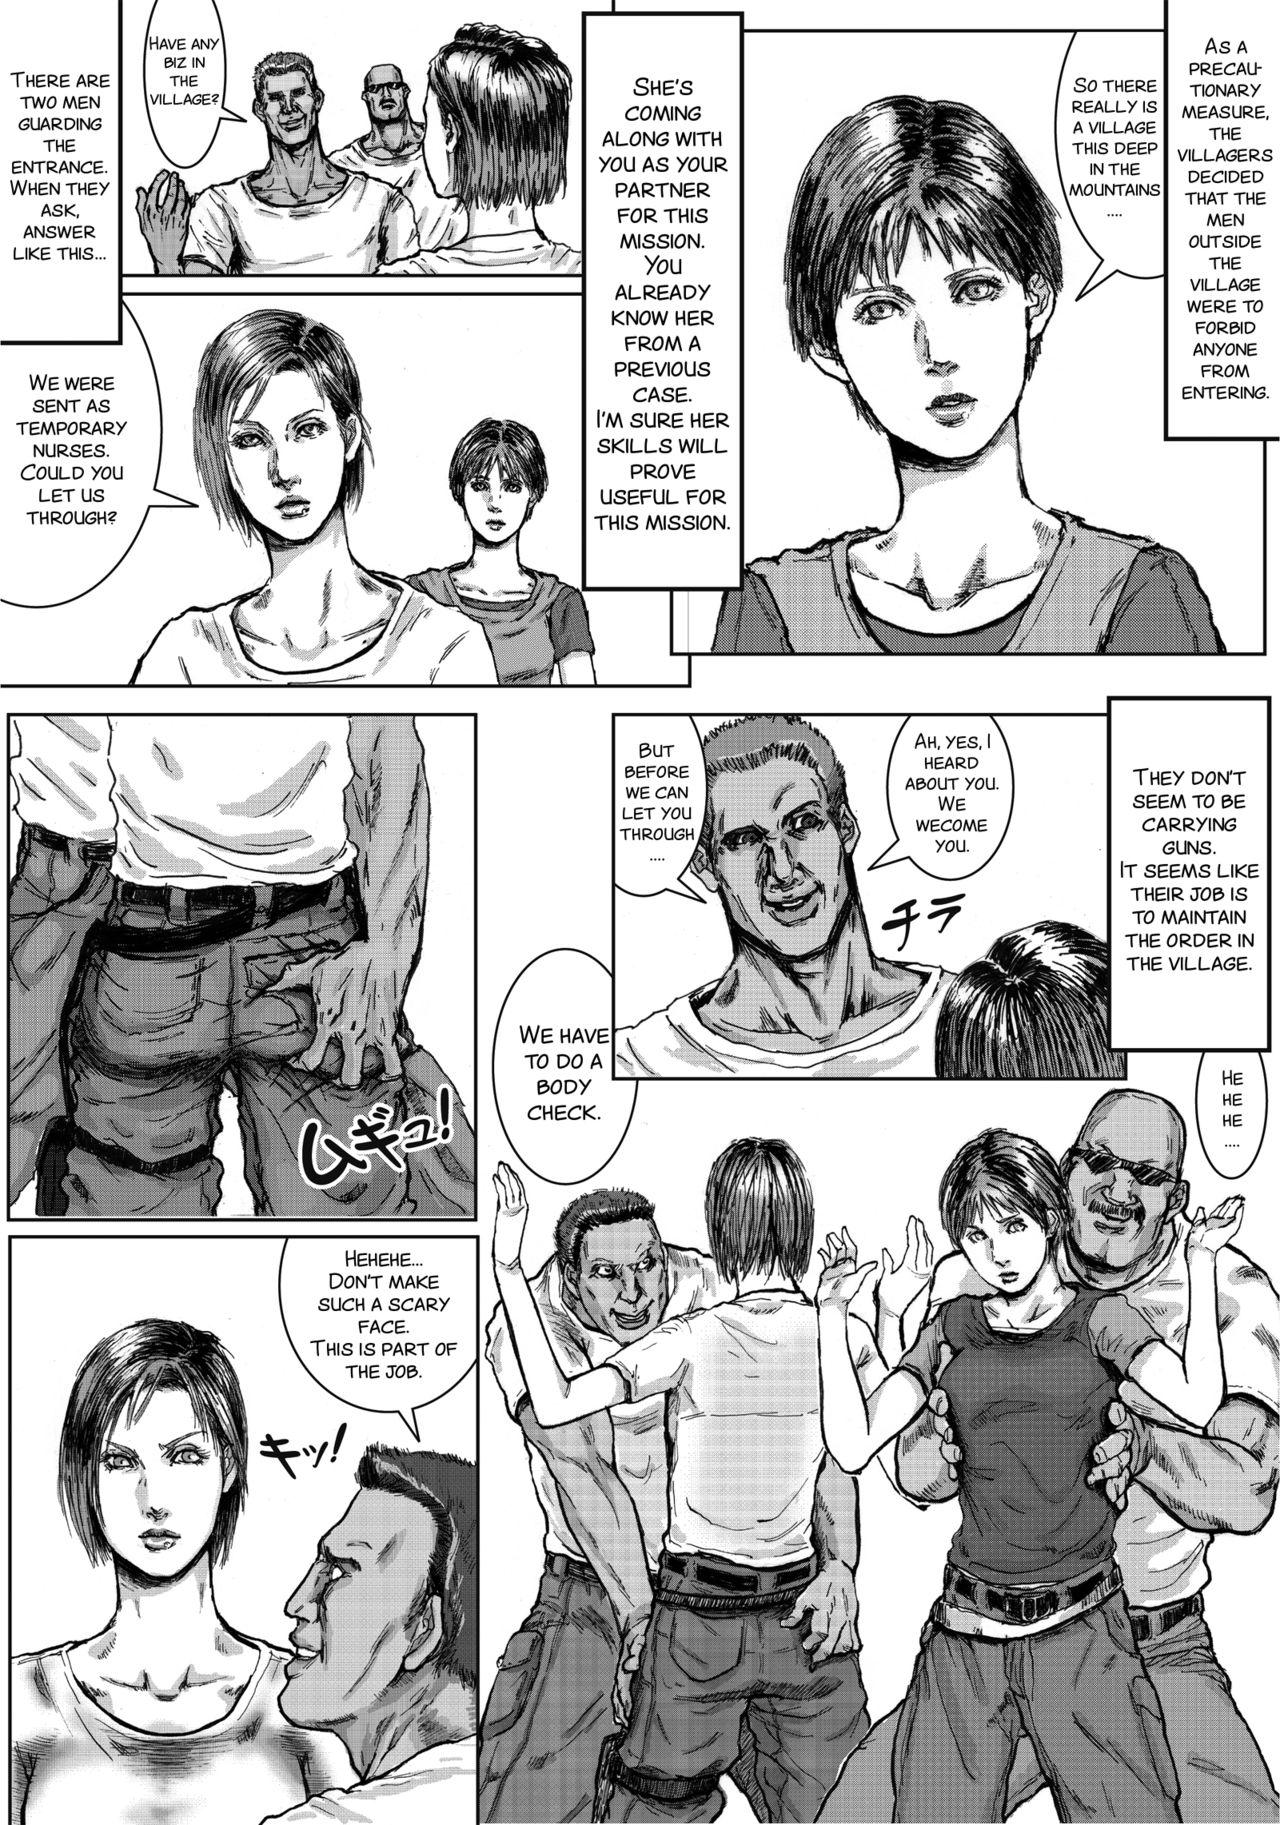 Sissy BODY HAZARD Suiminkan Hen - Resident evil 18 Year Old - Page 4